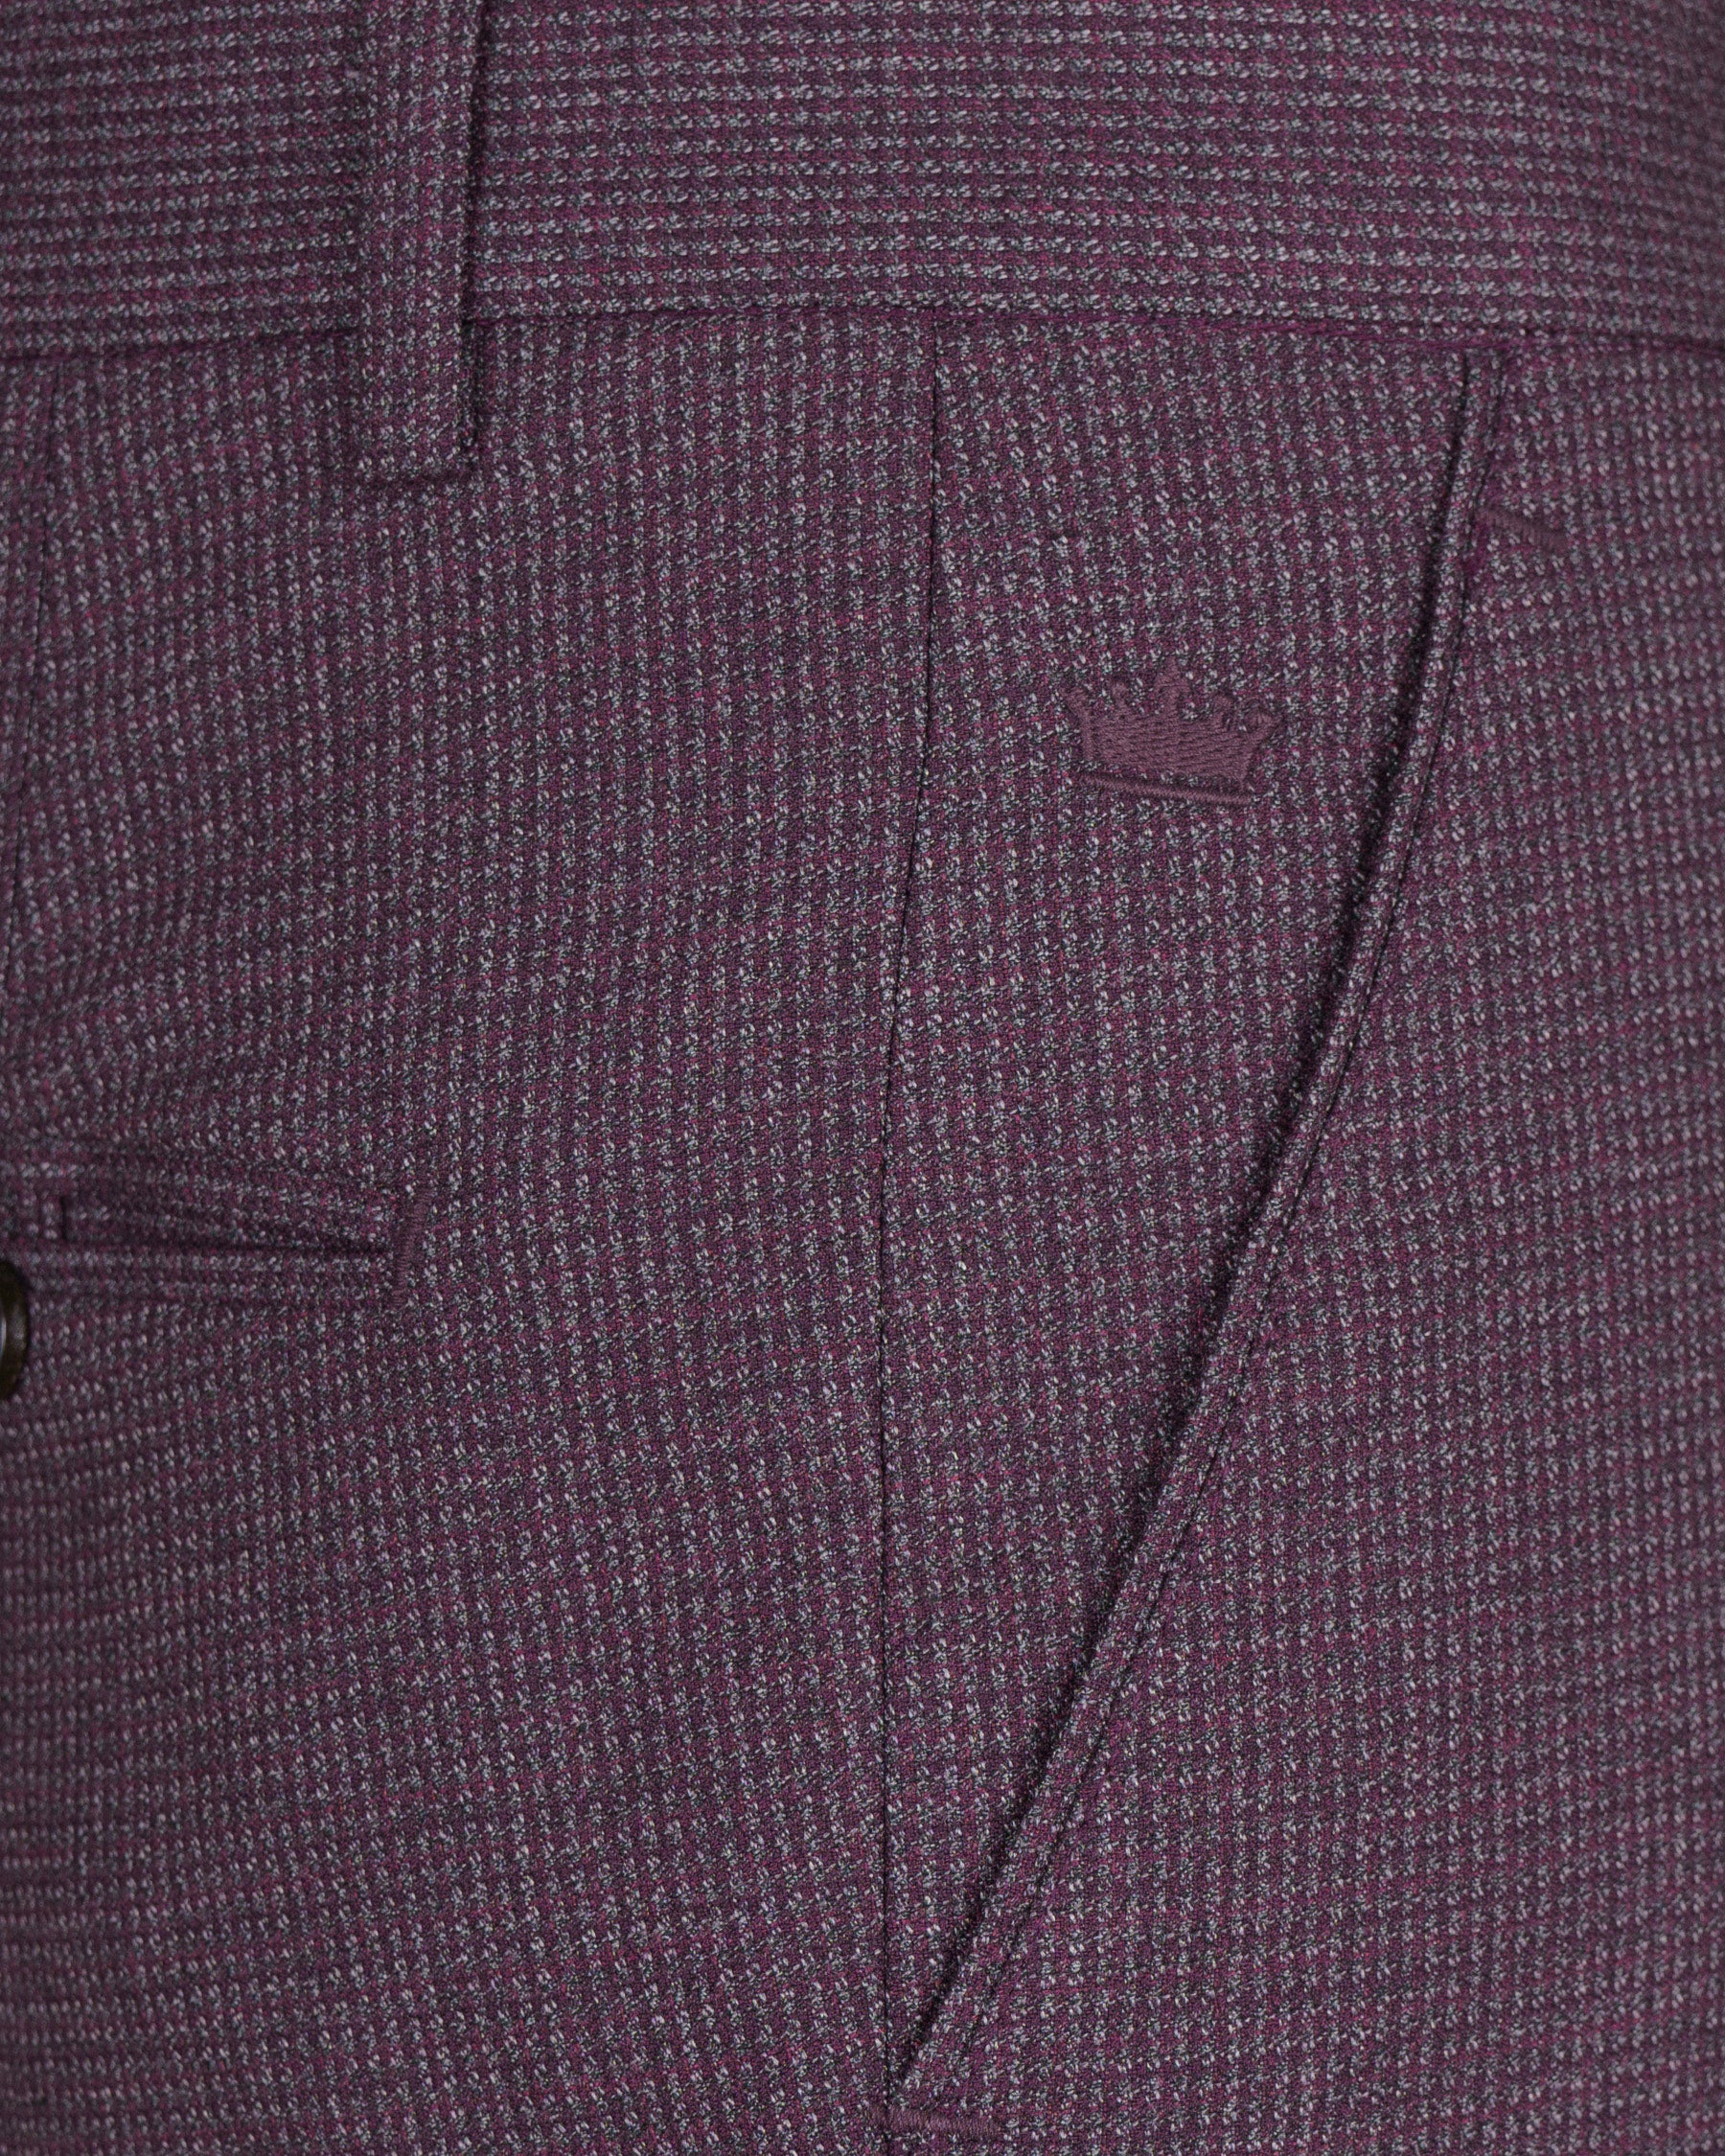 Burgandy with Grey Bandhgala Woolrich Suit ST1432-BG-36,ST1432-BG-38,ST1432-BG-40,ST1432-BG-42,ST1432-BG-44,ST1432-BG-46,ST1432-BG-48,ST1432-BG-50,ST1432-BG-52,ST1432-BG-54,ST1432-BG-56,ST1432-BG-58,ST1432-BG-60